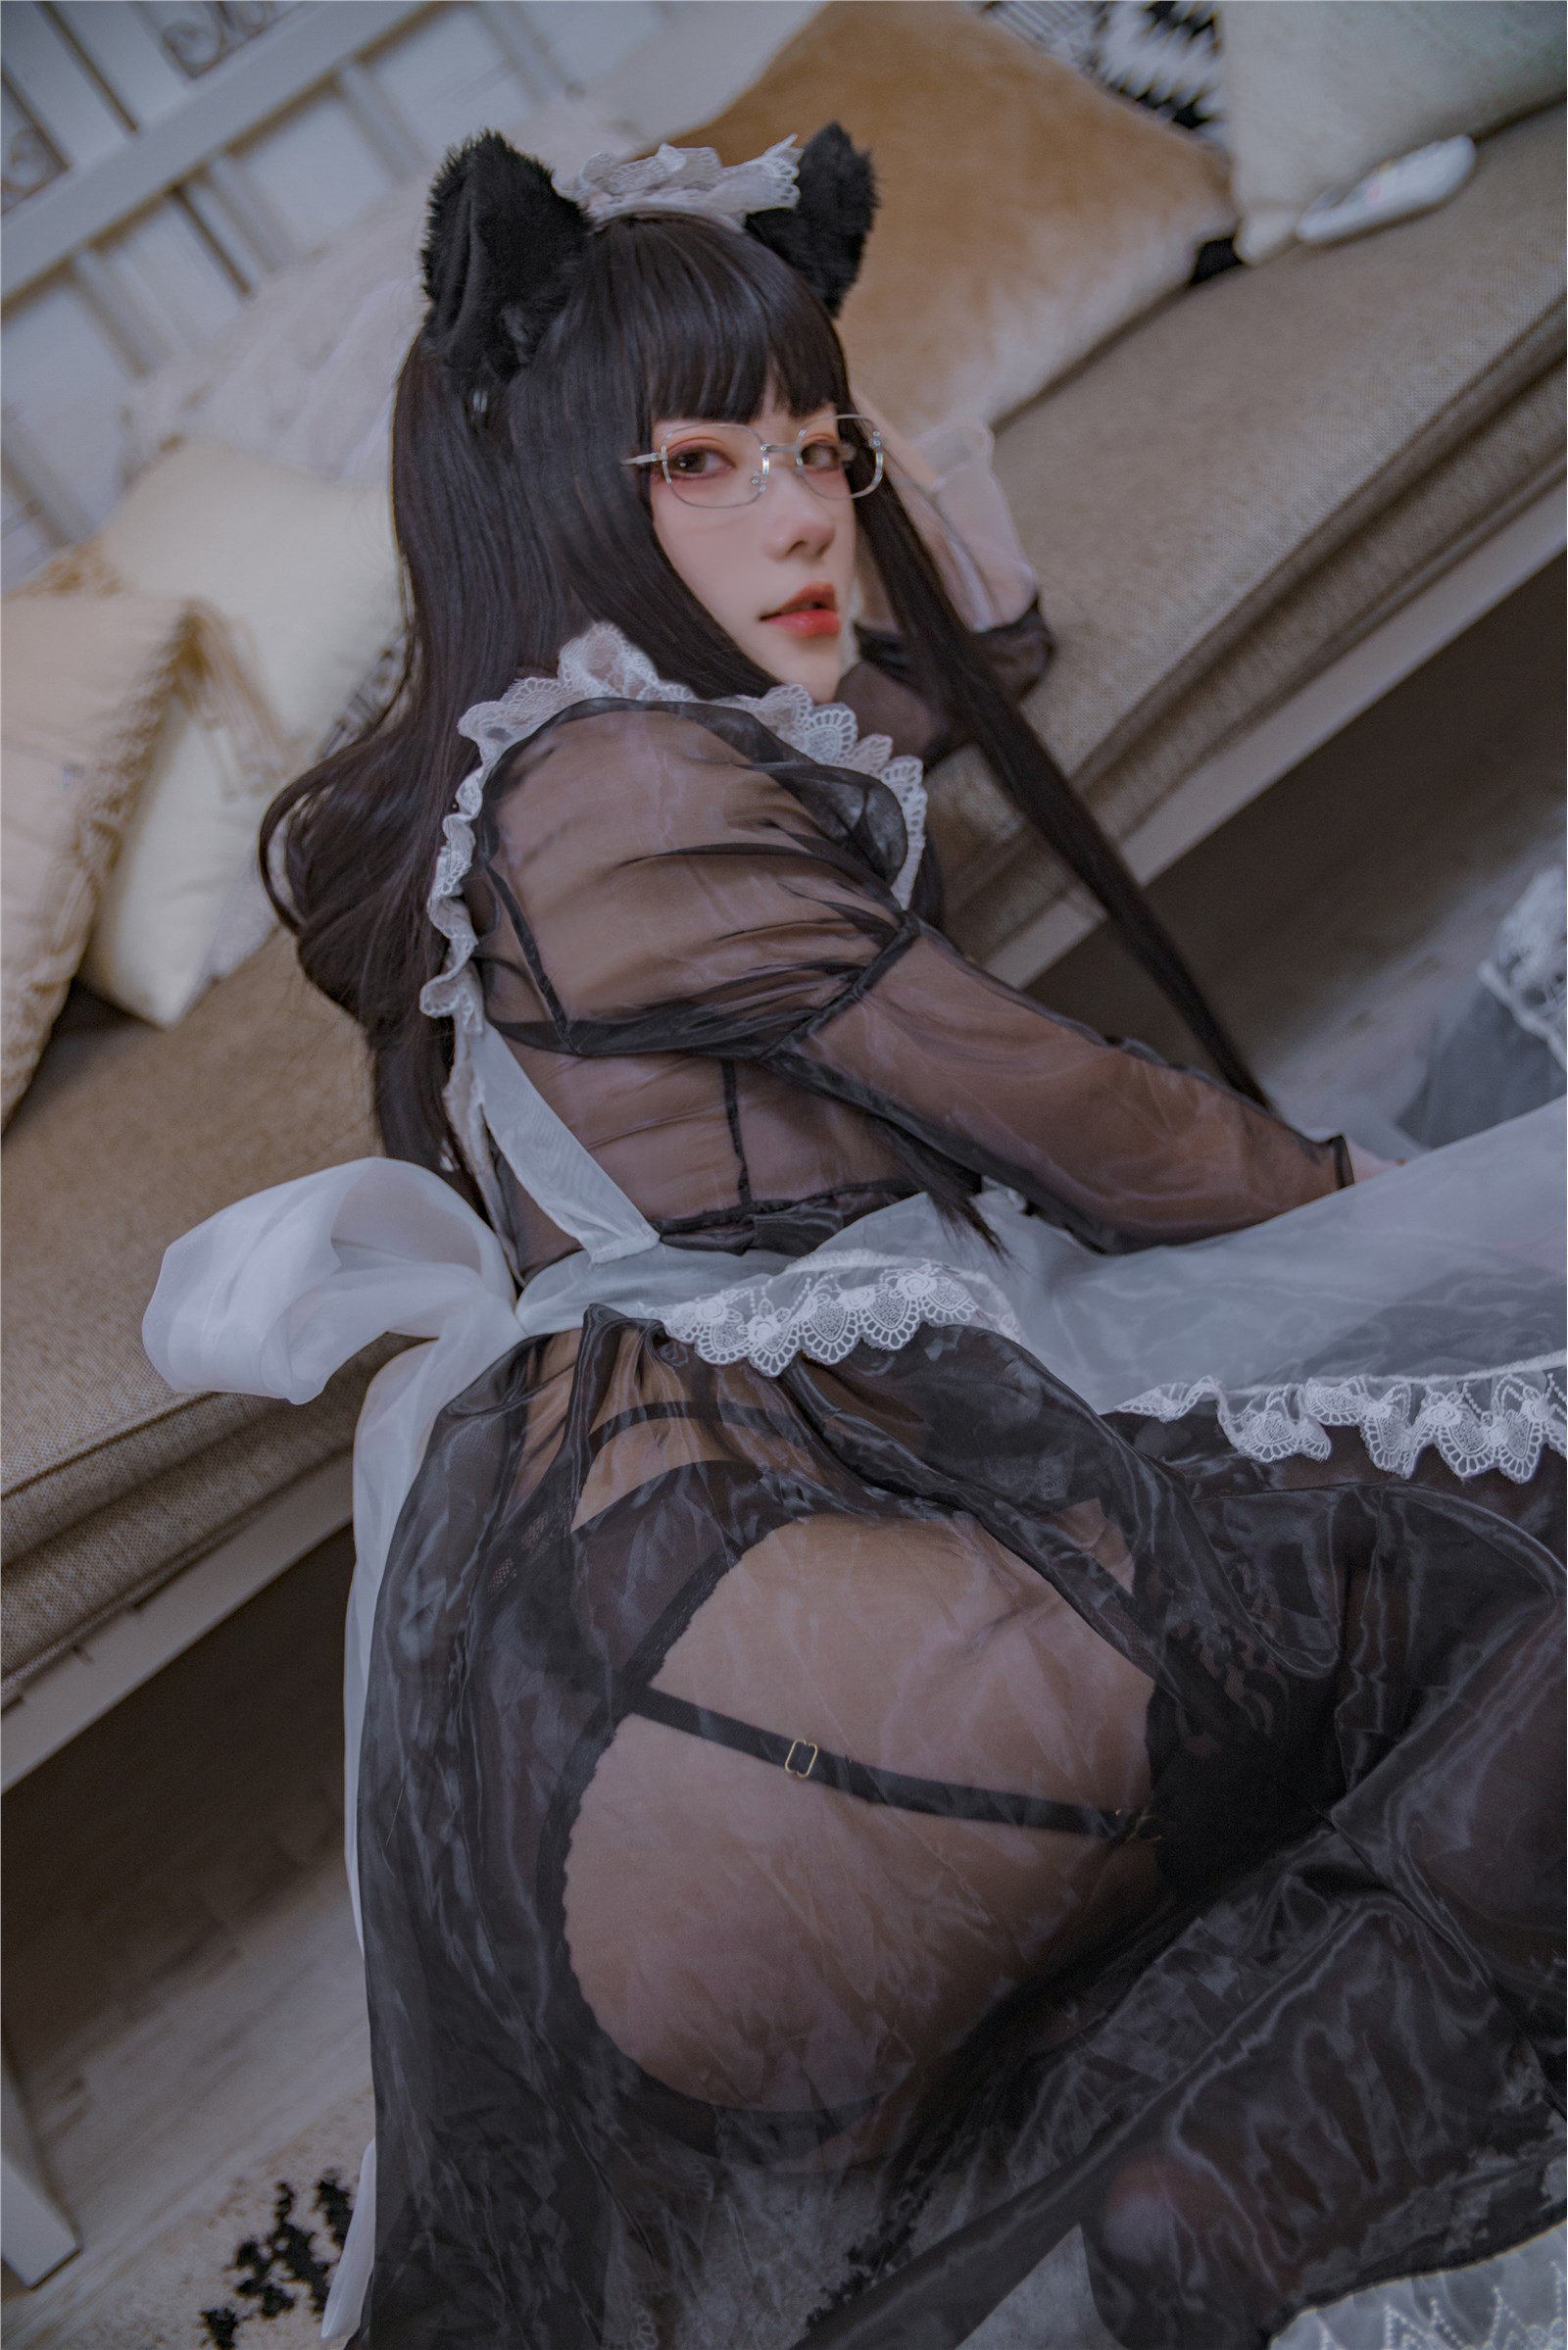 Cosplay cheese Wii - black transparent maid(17)